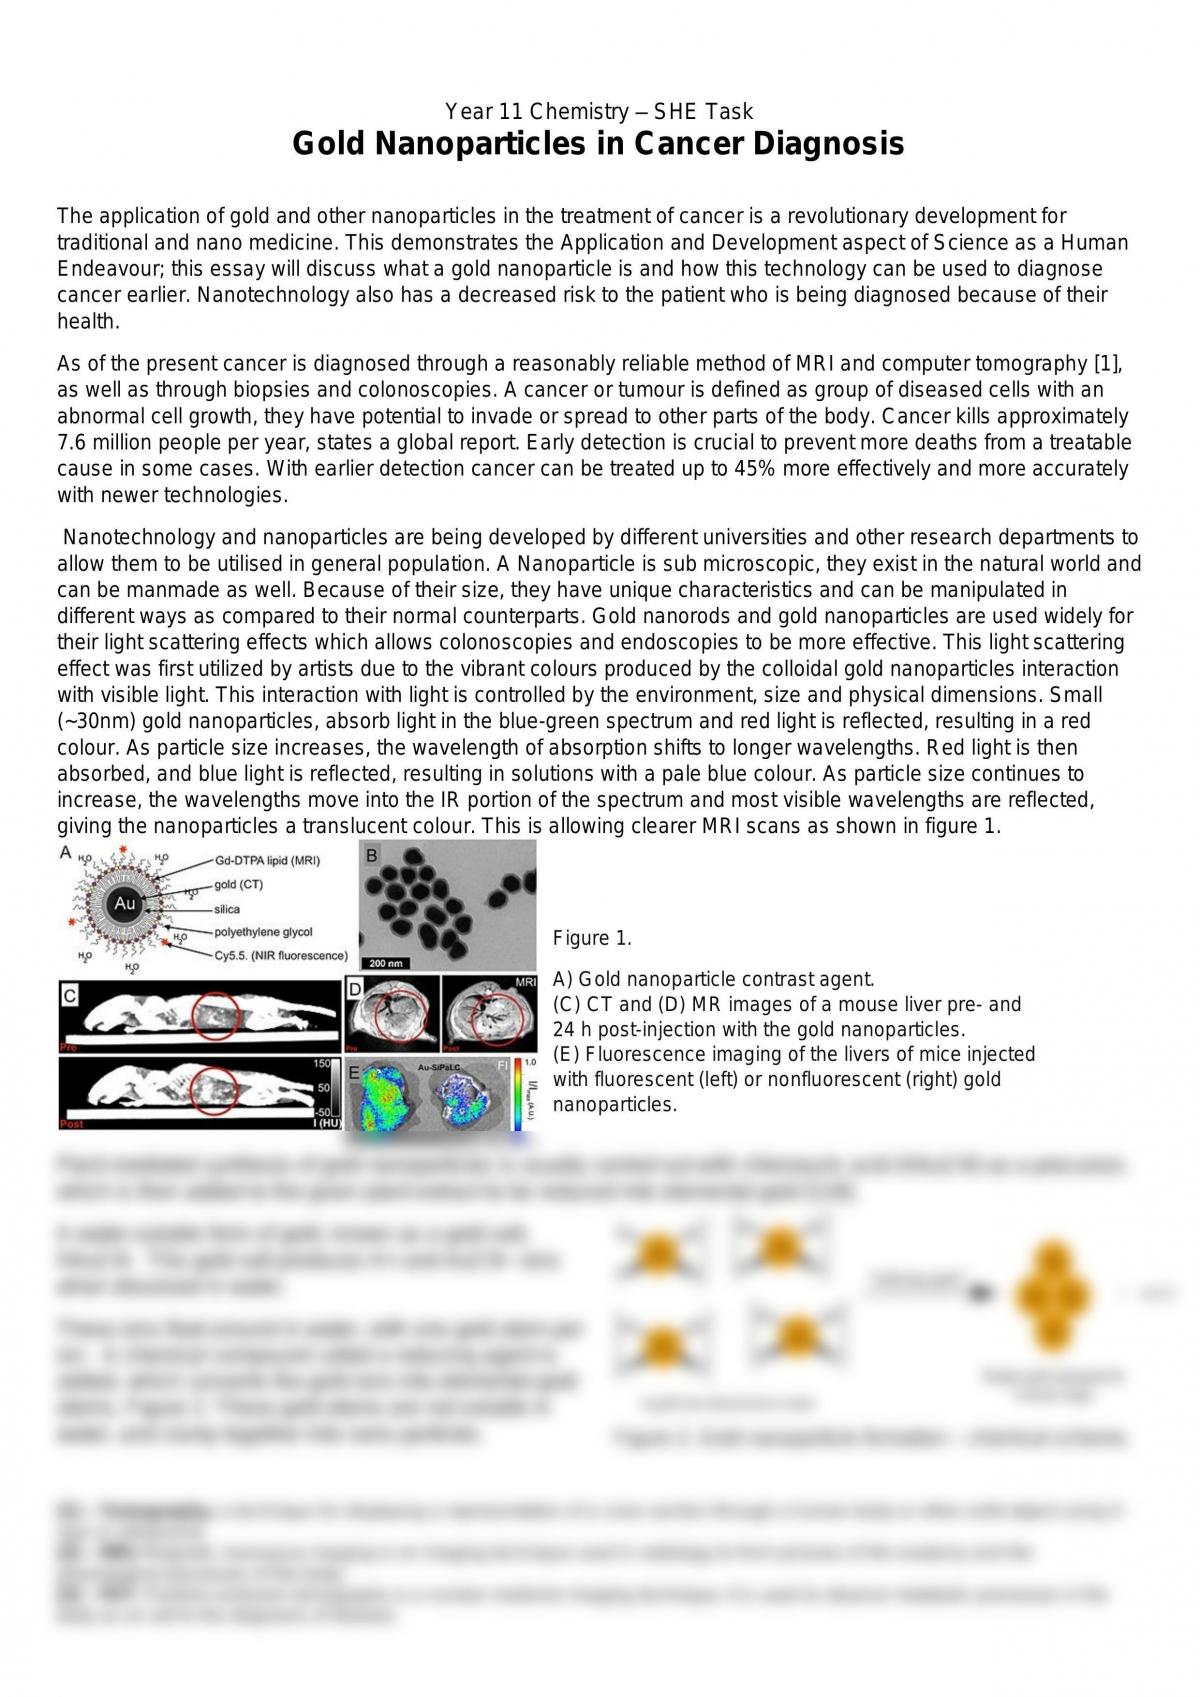 Gold Nanoparticles in cancer diagnosis - Page 1